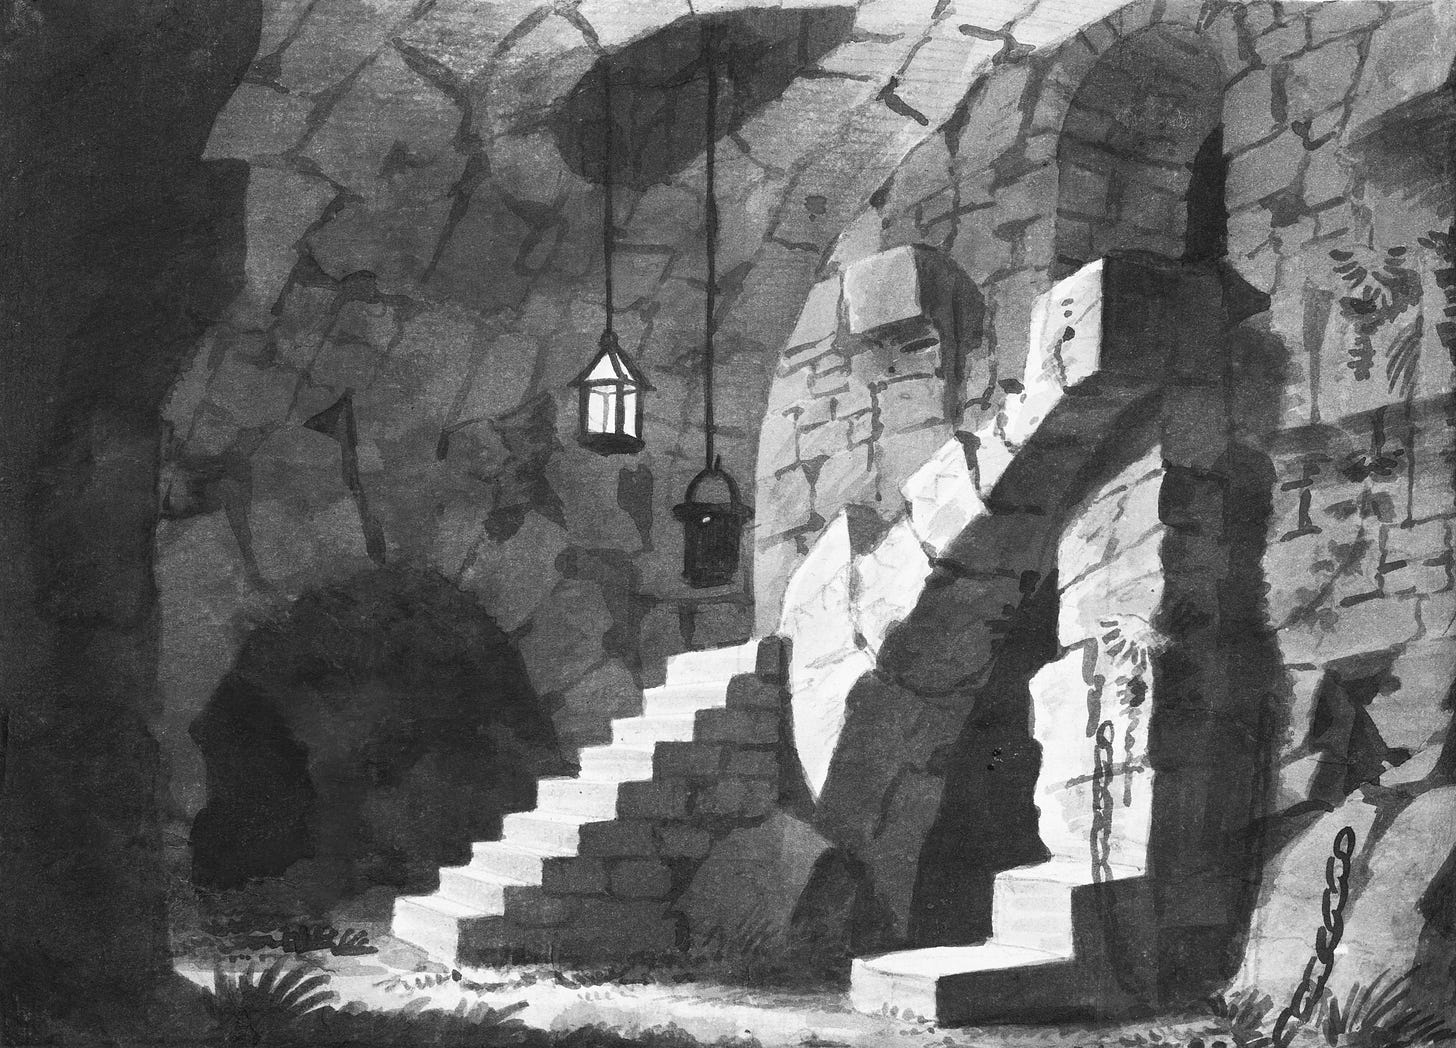 A water colour of stone steps leading to cave entrances. A lantern hangs from the ceiling. Loose chains litter the foreground.